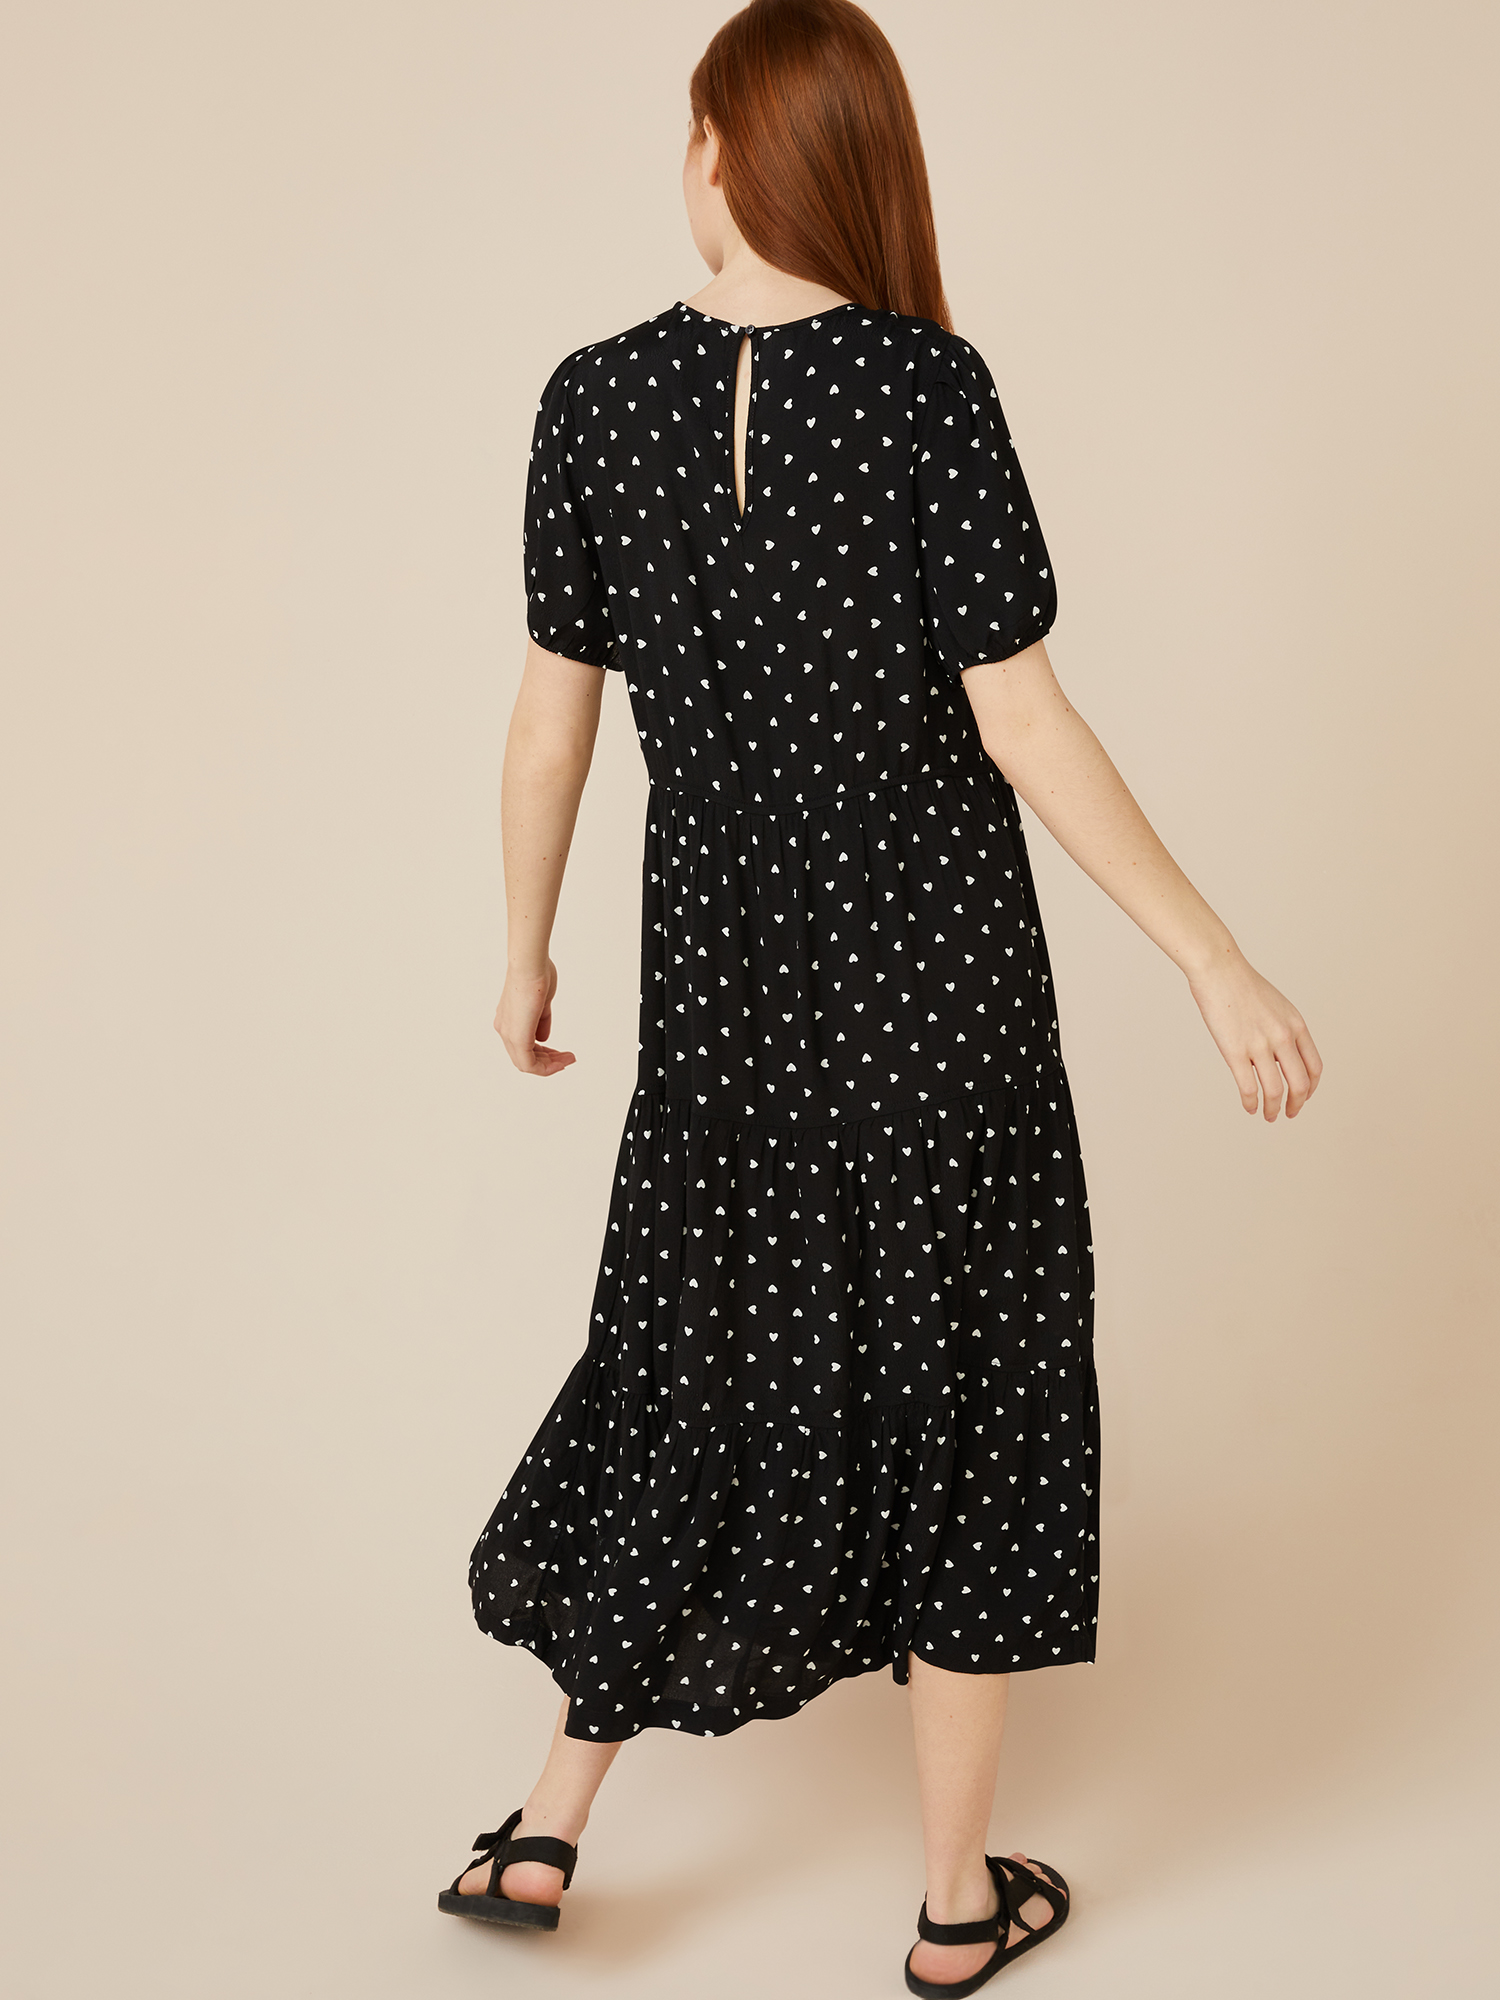 Free Assembly Women's Short Sleeve Tiered Maxi Dress - image 3 of 6